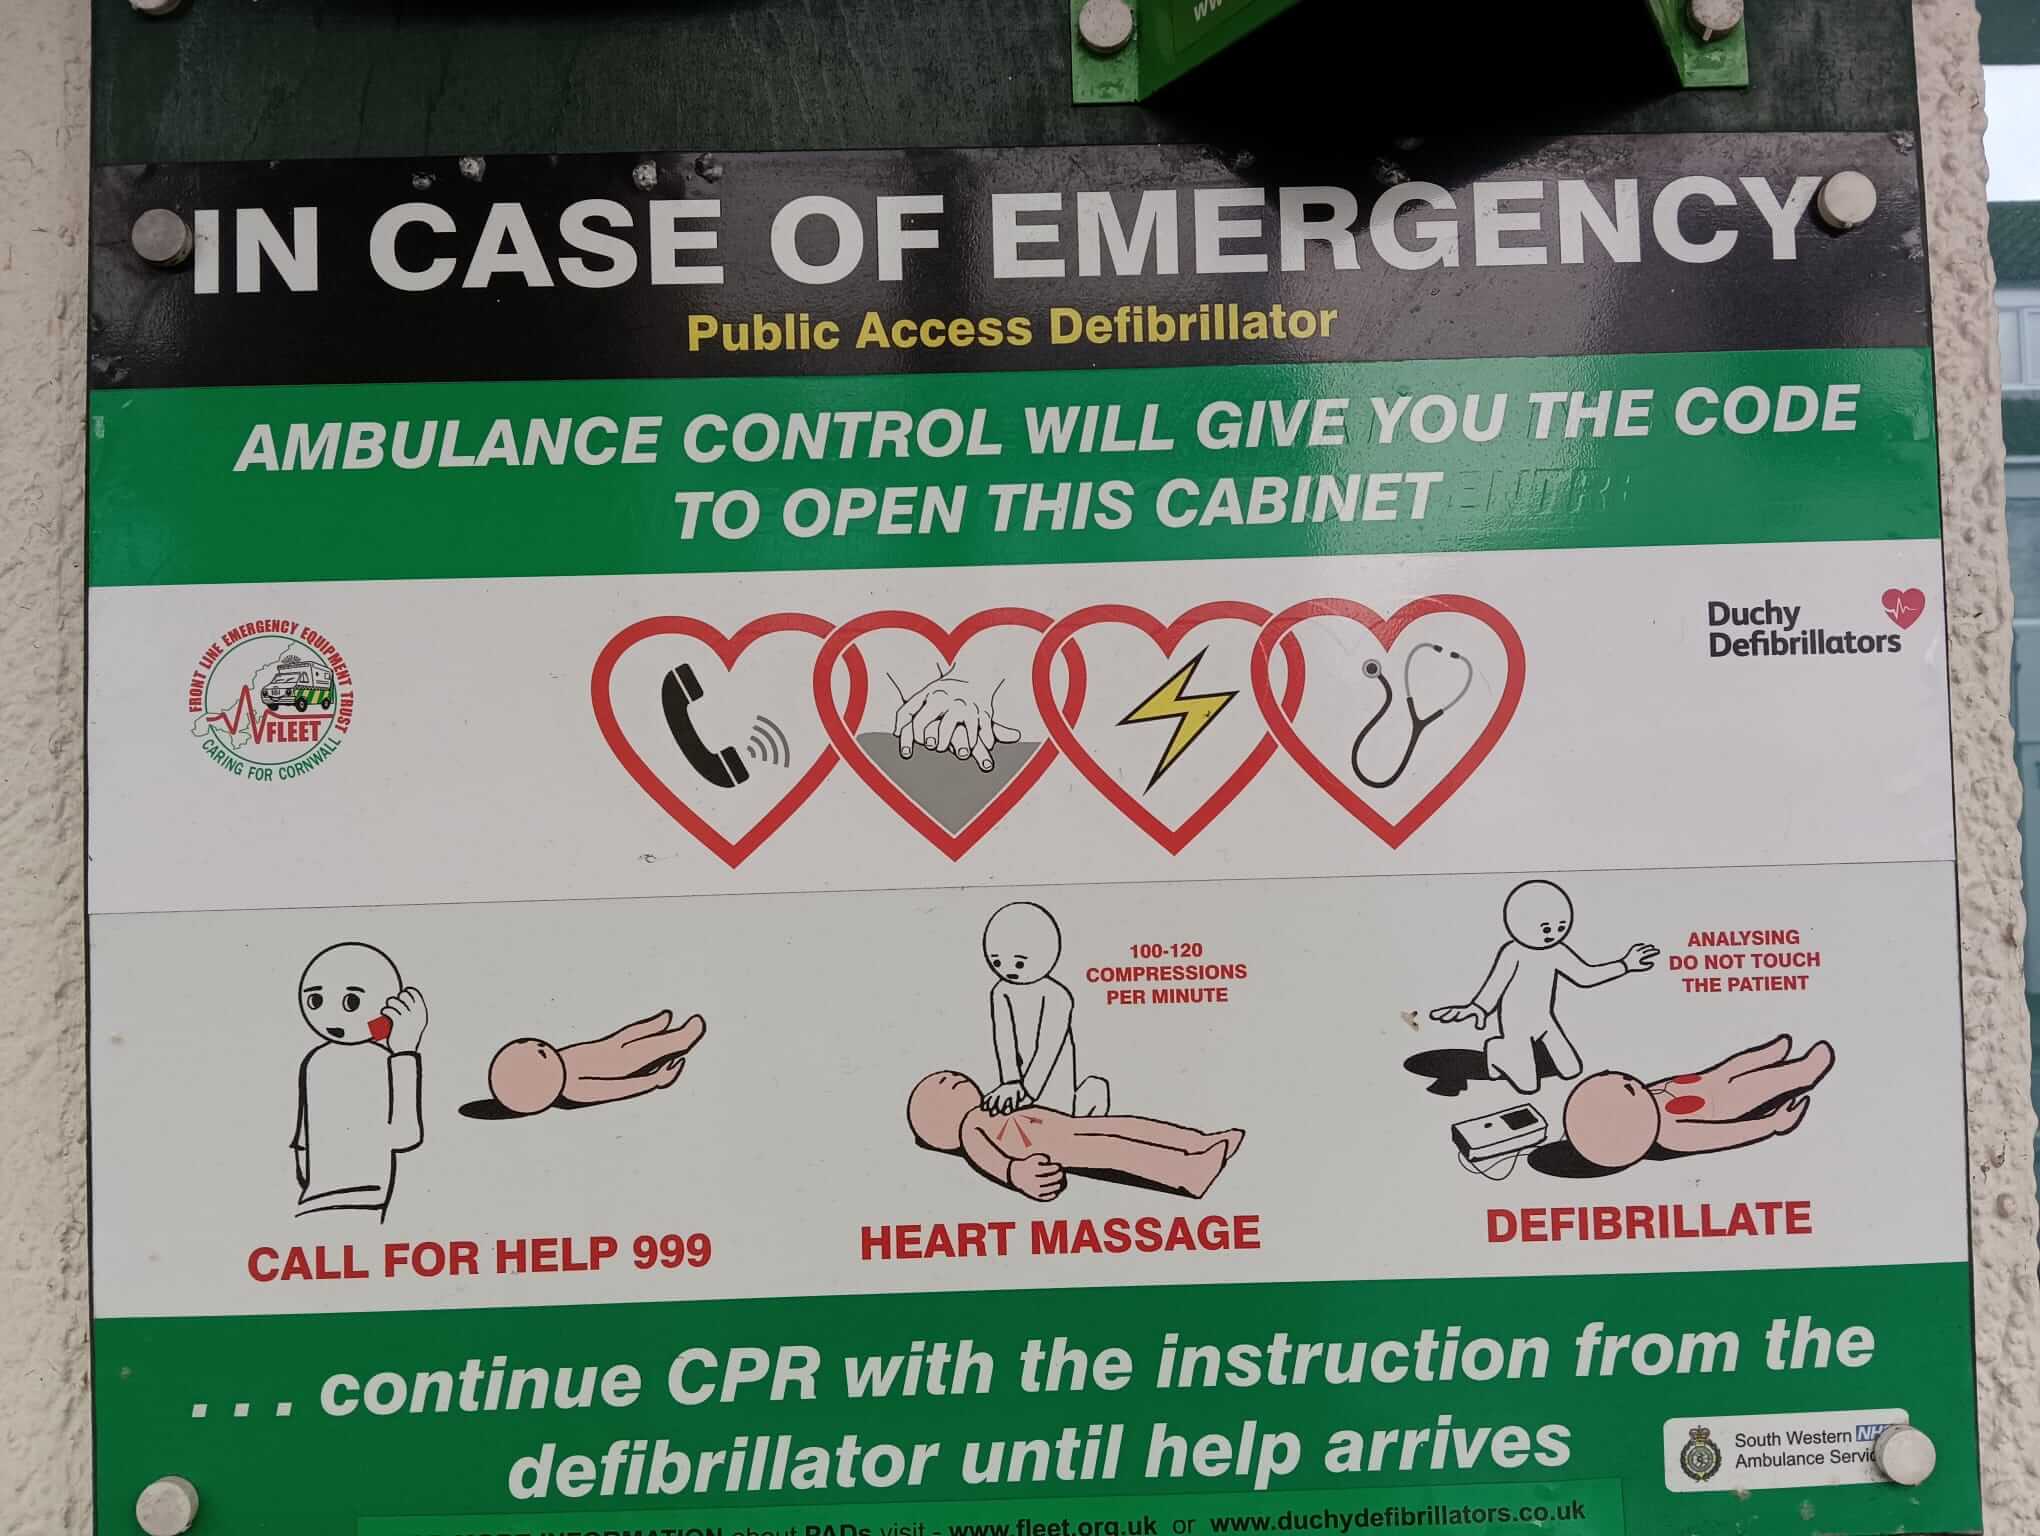 Signage connected with a second AED with symbols and instructions about calling 999, performing CPR and delivering a shock. It reads: In case of emergency, public access defibrillator.. Ambulance Control will give you the code to open this cabinet.